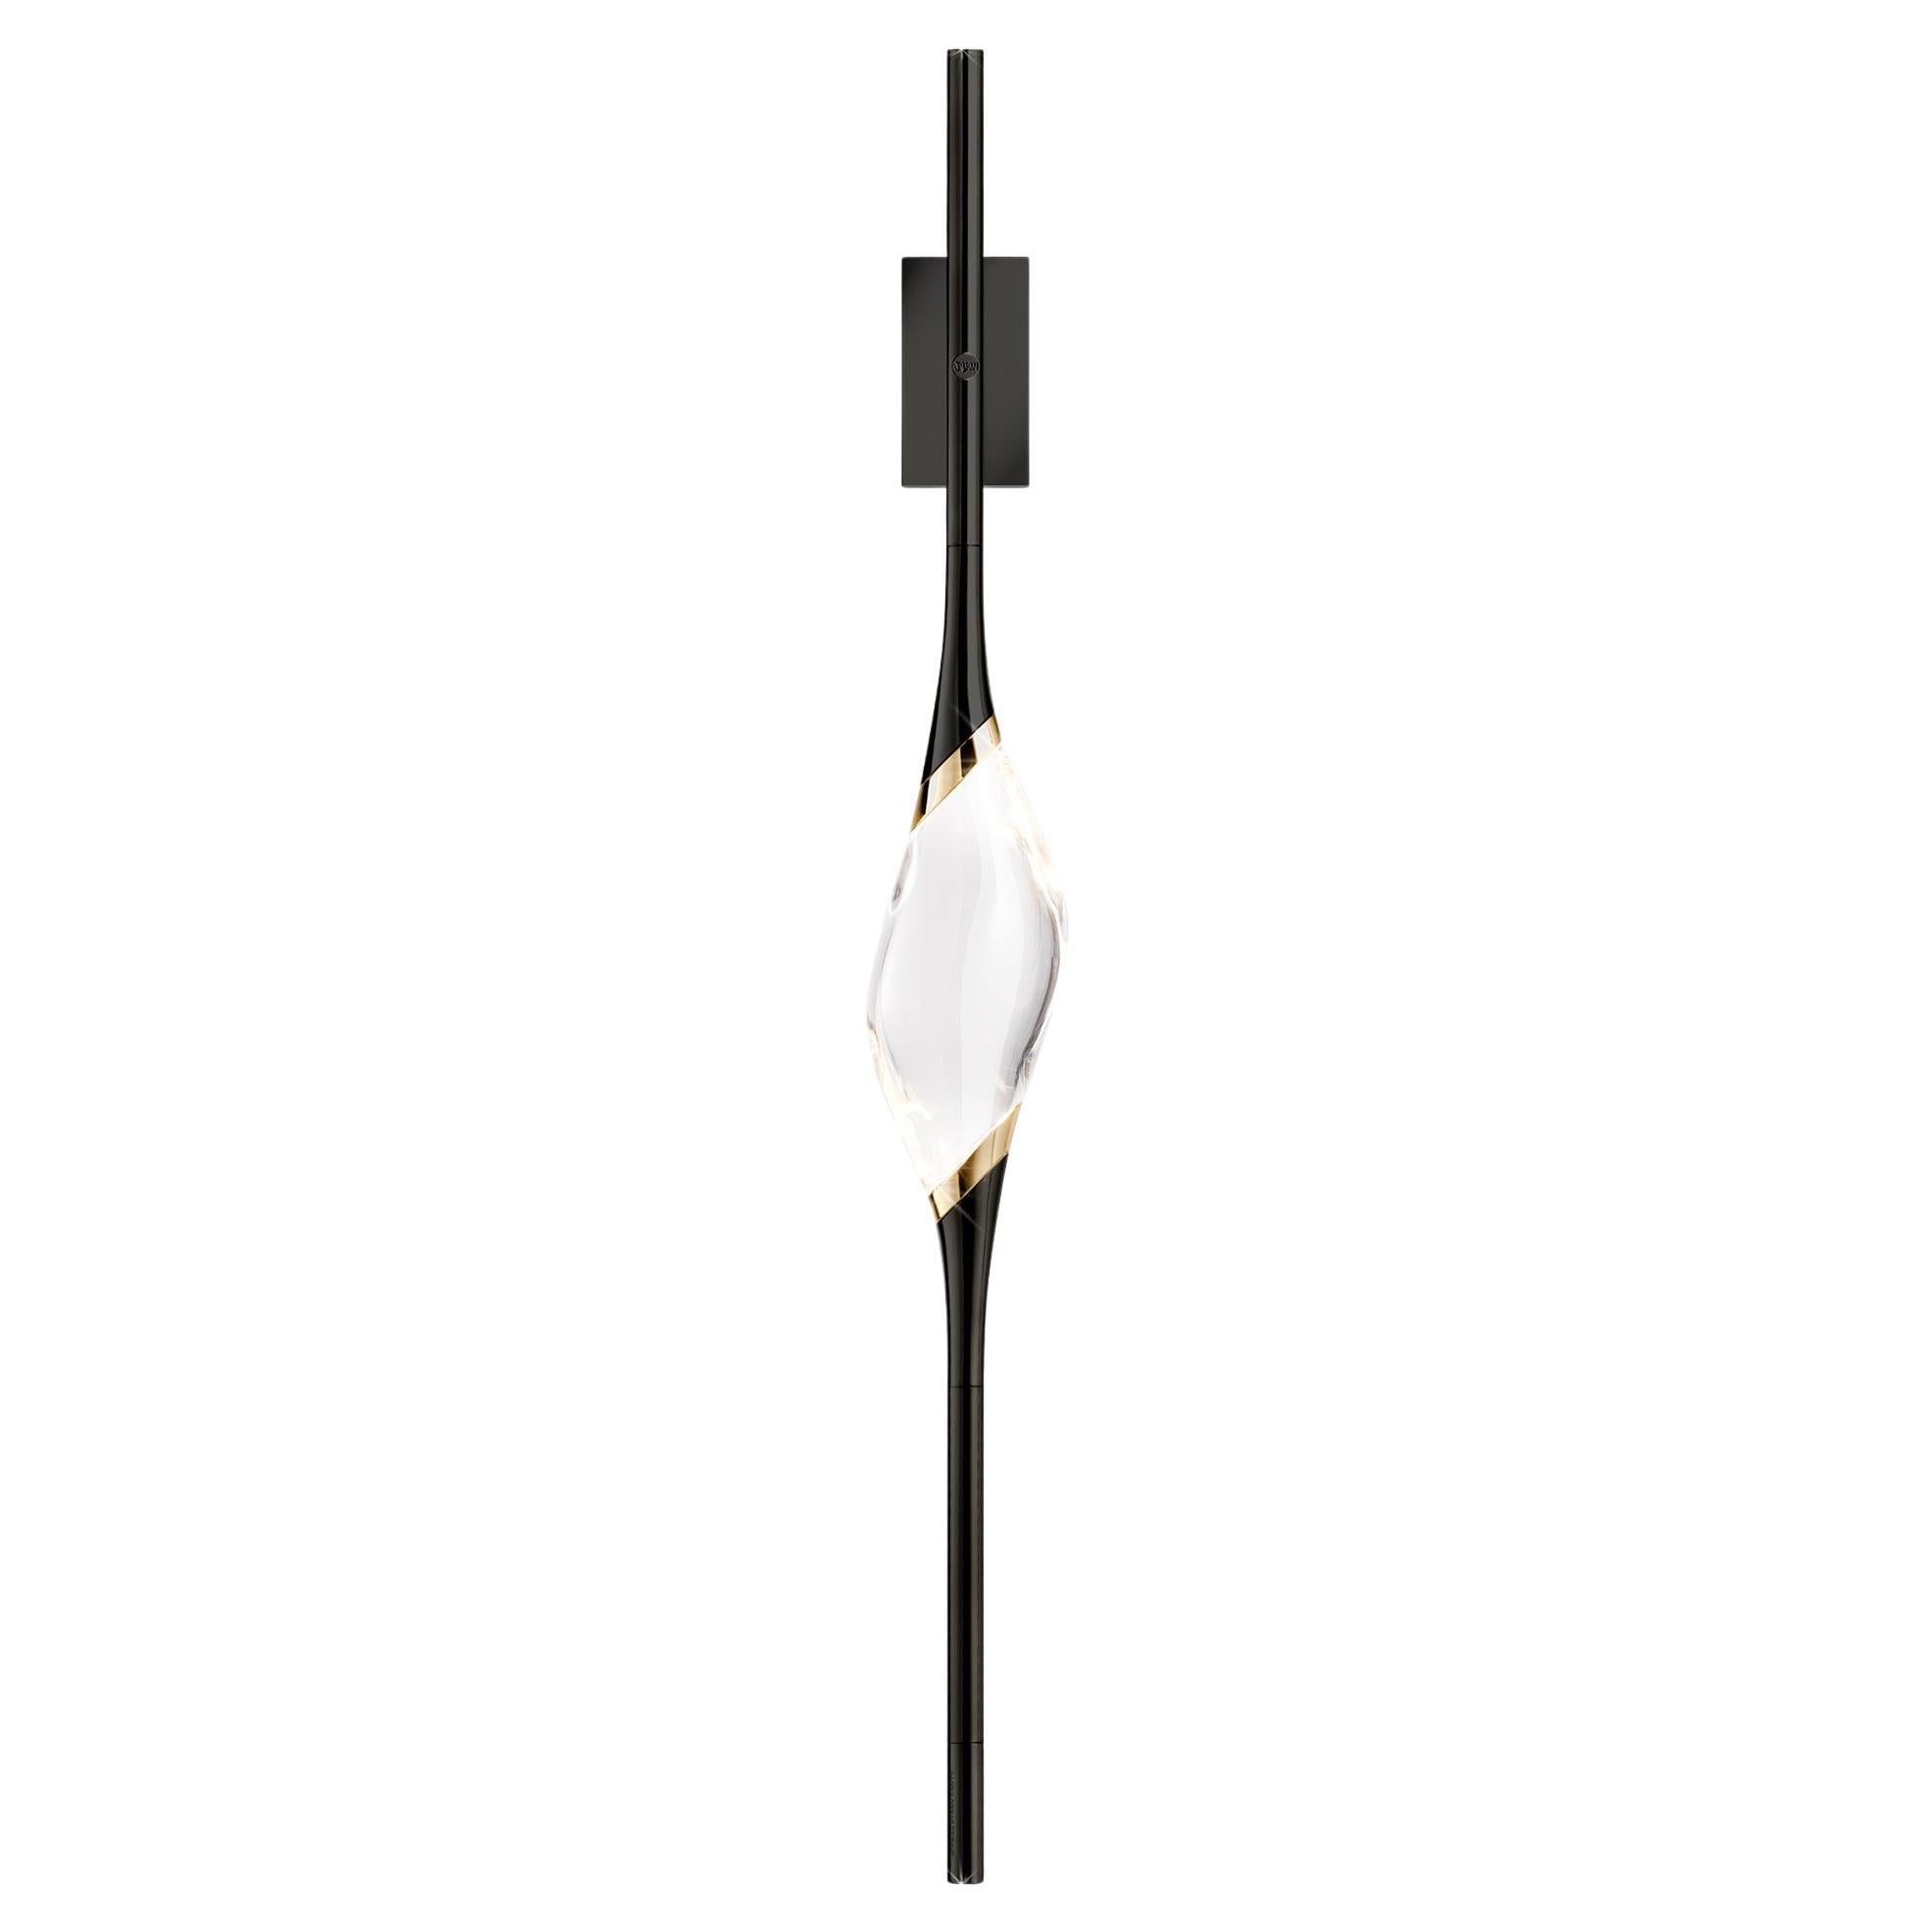 "Il Pezzo 12 Wall Sconce" - black and polished brass - crystal - Made in Italy en vente